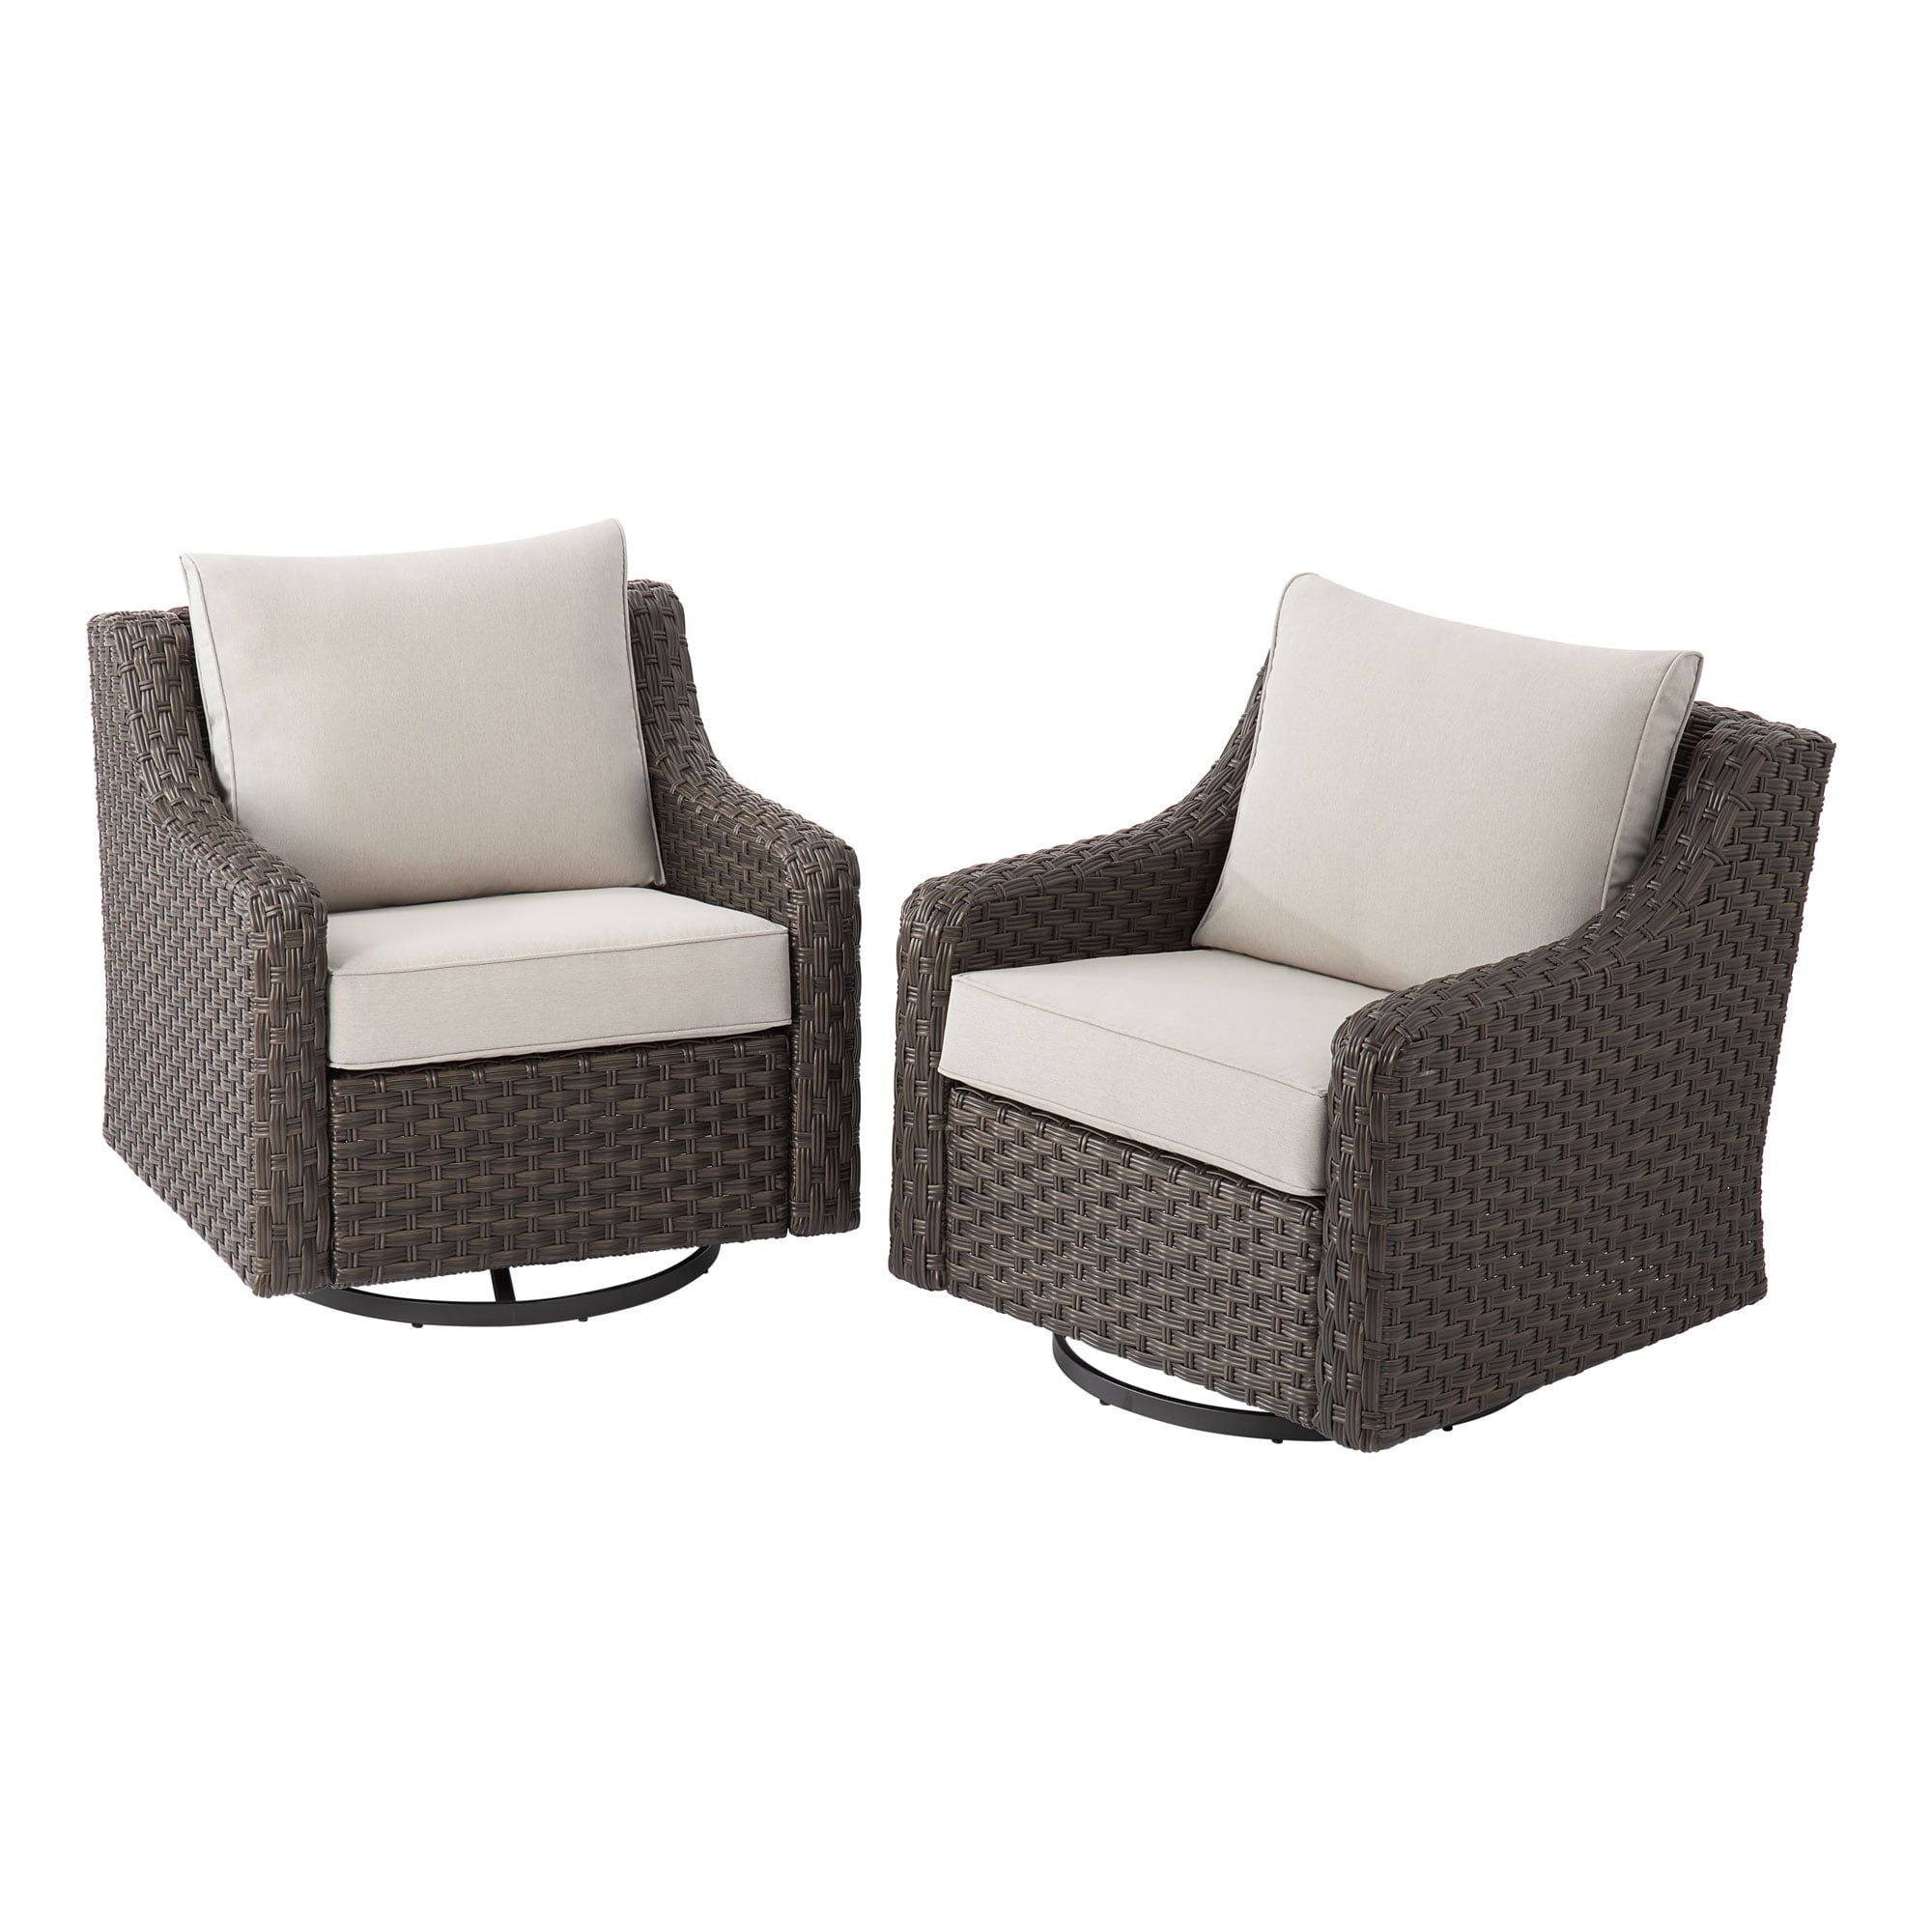 Better Homes & Gardens River Oaks 2 Piece Wicker Swivel Glider With Patio  Covers, Dark – Walmart With Regard To 2 Piece Swivel Gliders With Patio Cover (Photo 6 of 15)